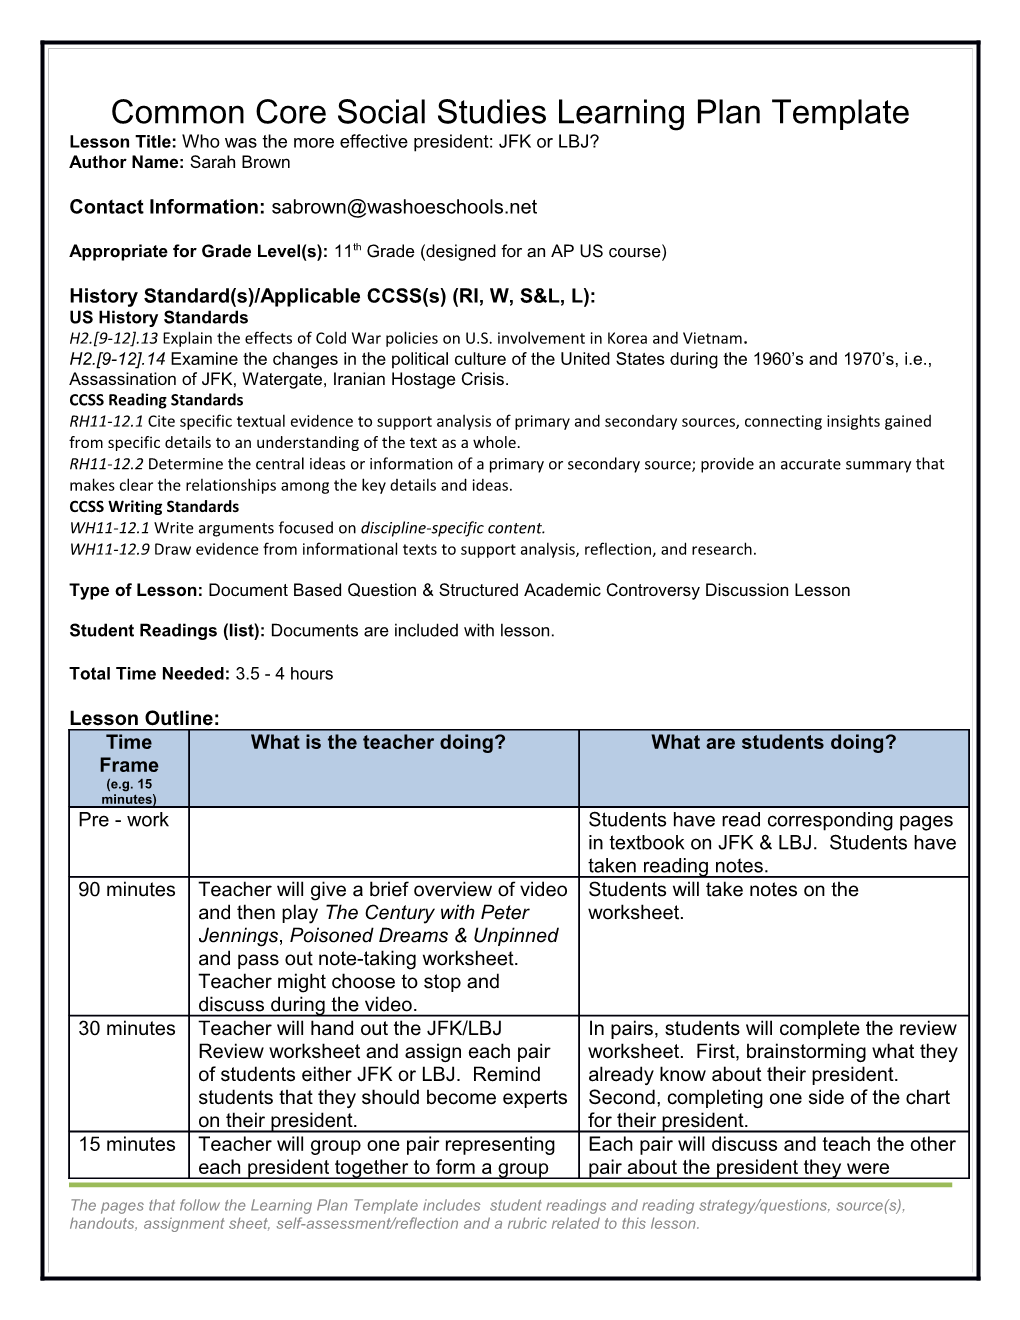 Common Core Social Studies Learning Plan Template